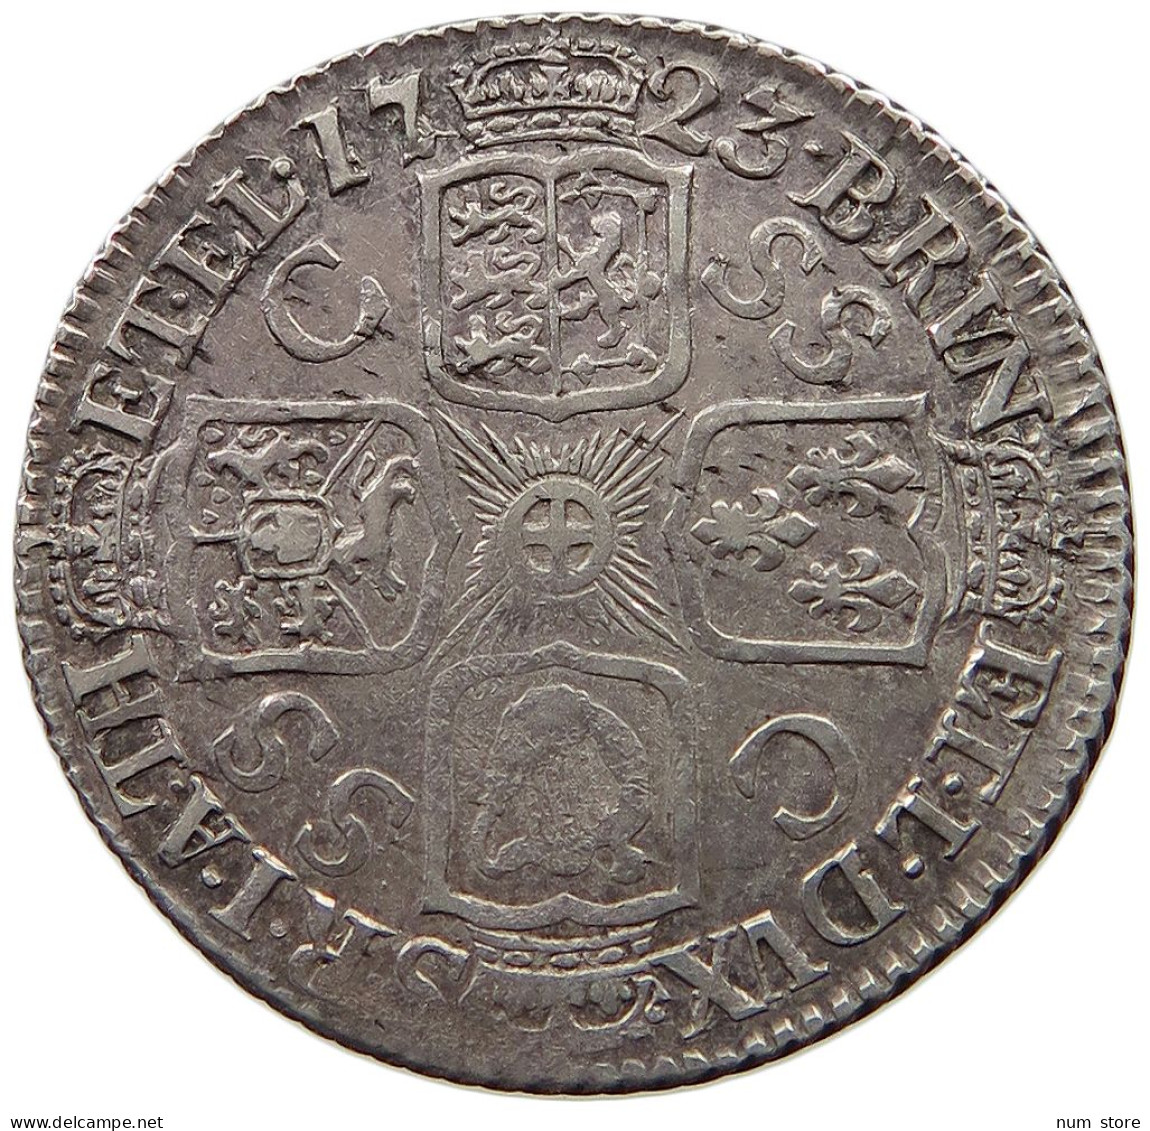 GREAT BRITAIN SHILLING 1723 George I. (1714-1727) #t059 0039 - H. 1 Shilling